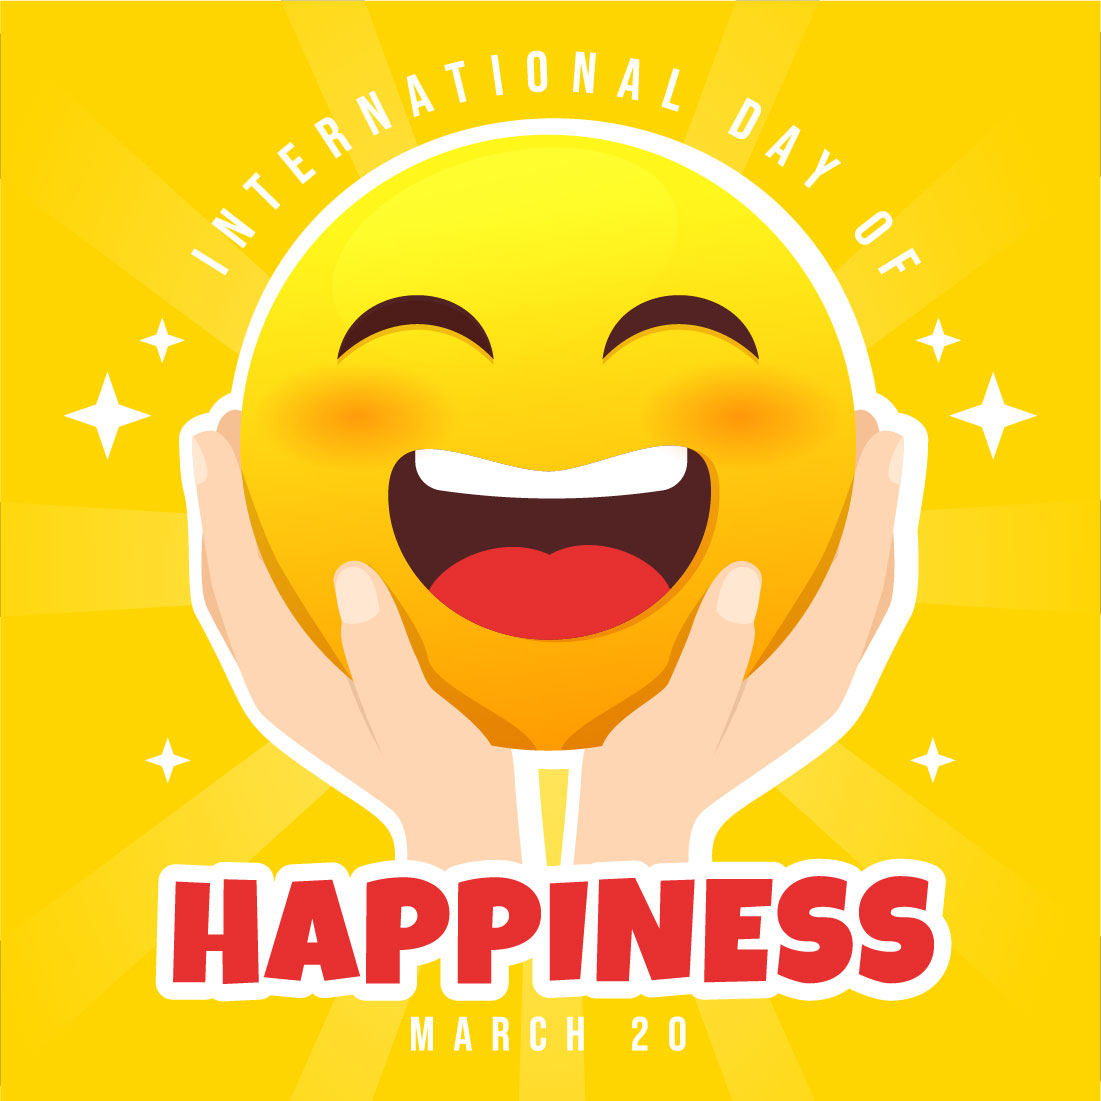 15 World Happiness Day Illustration cover image.